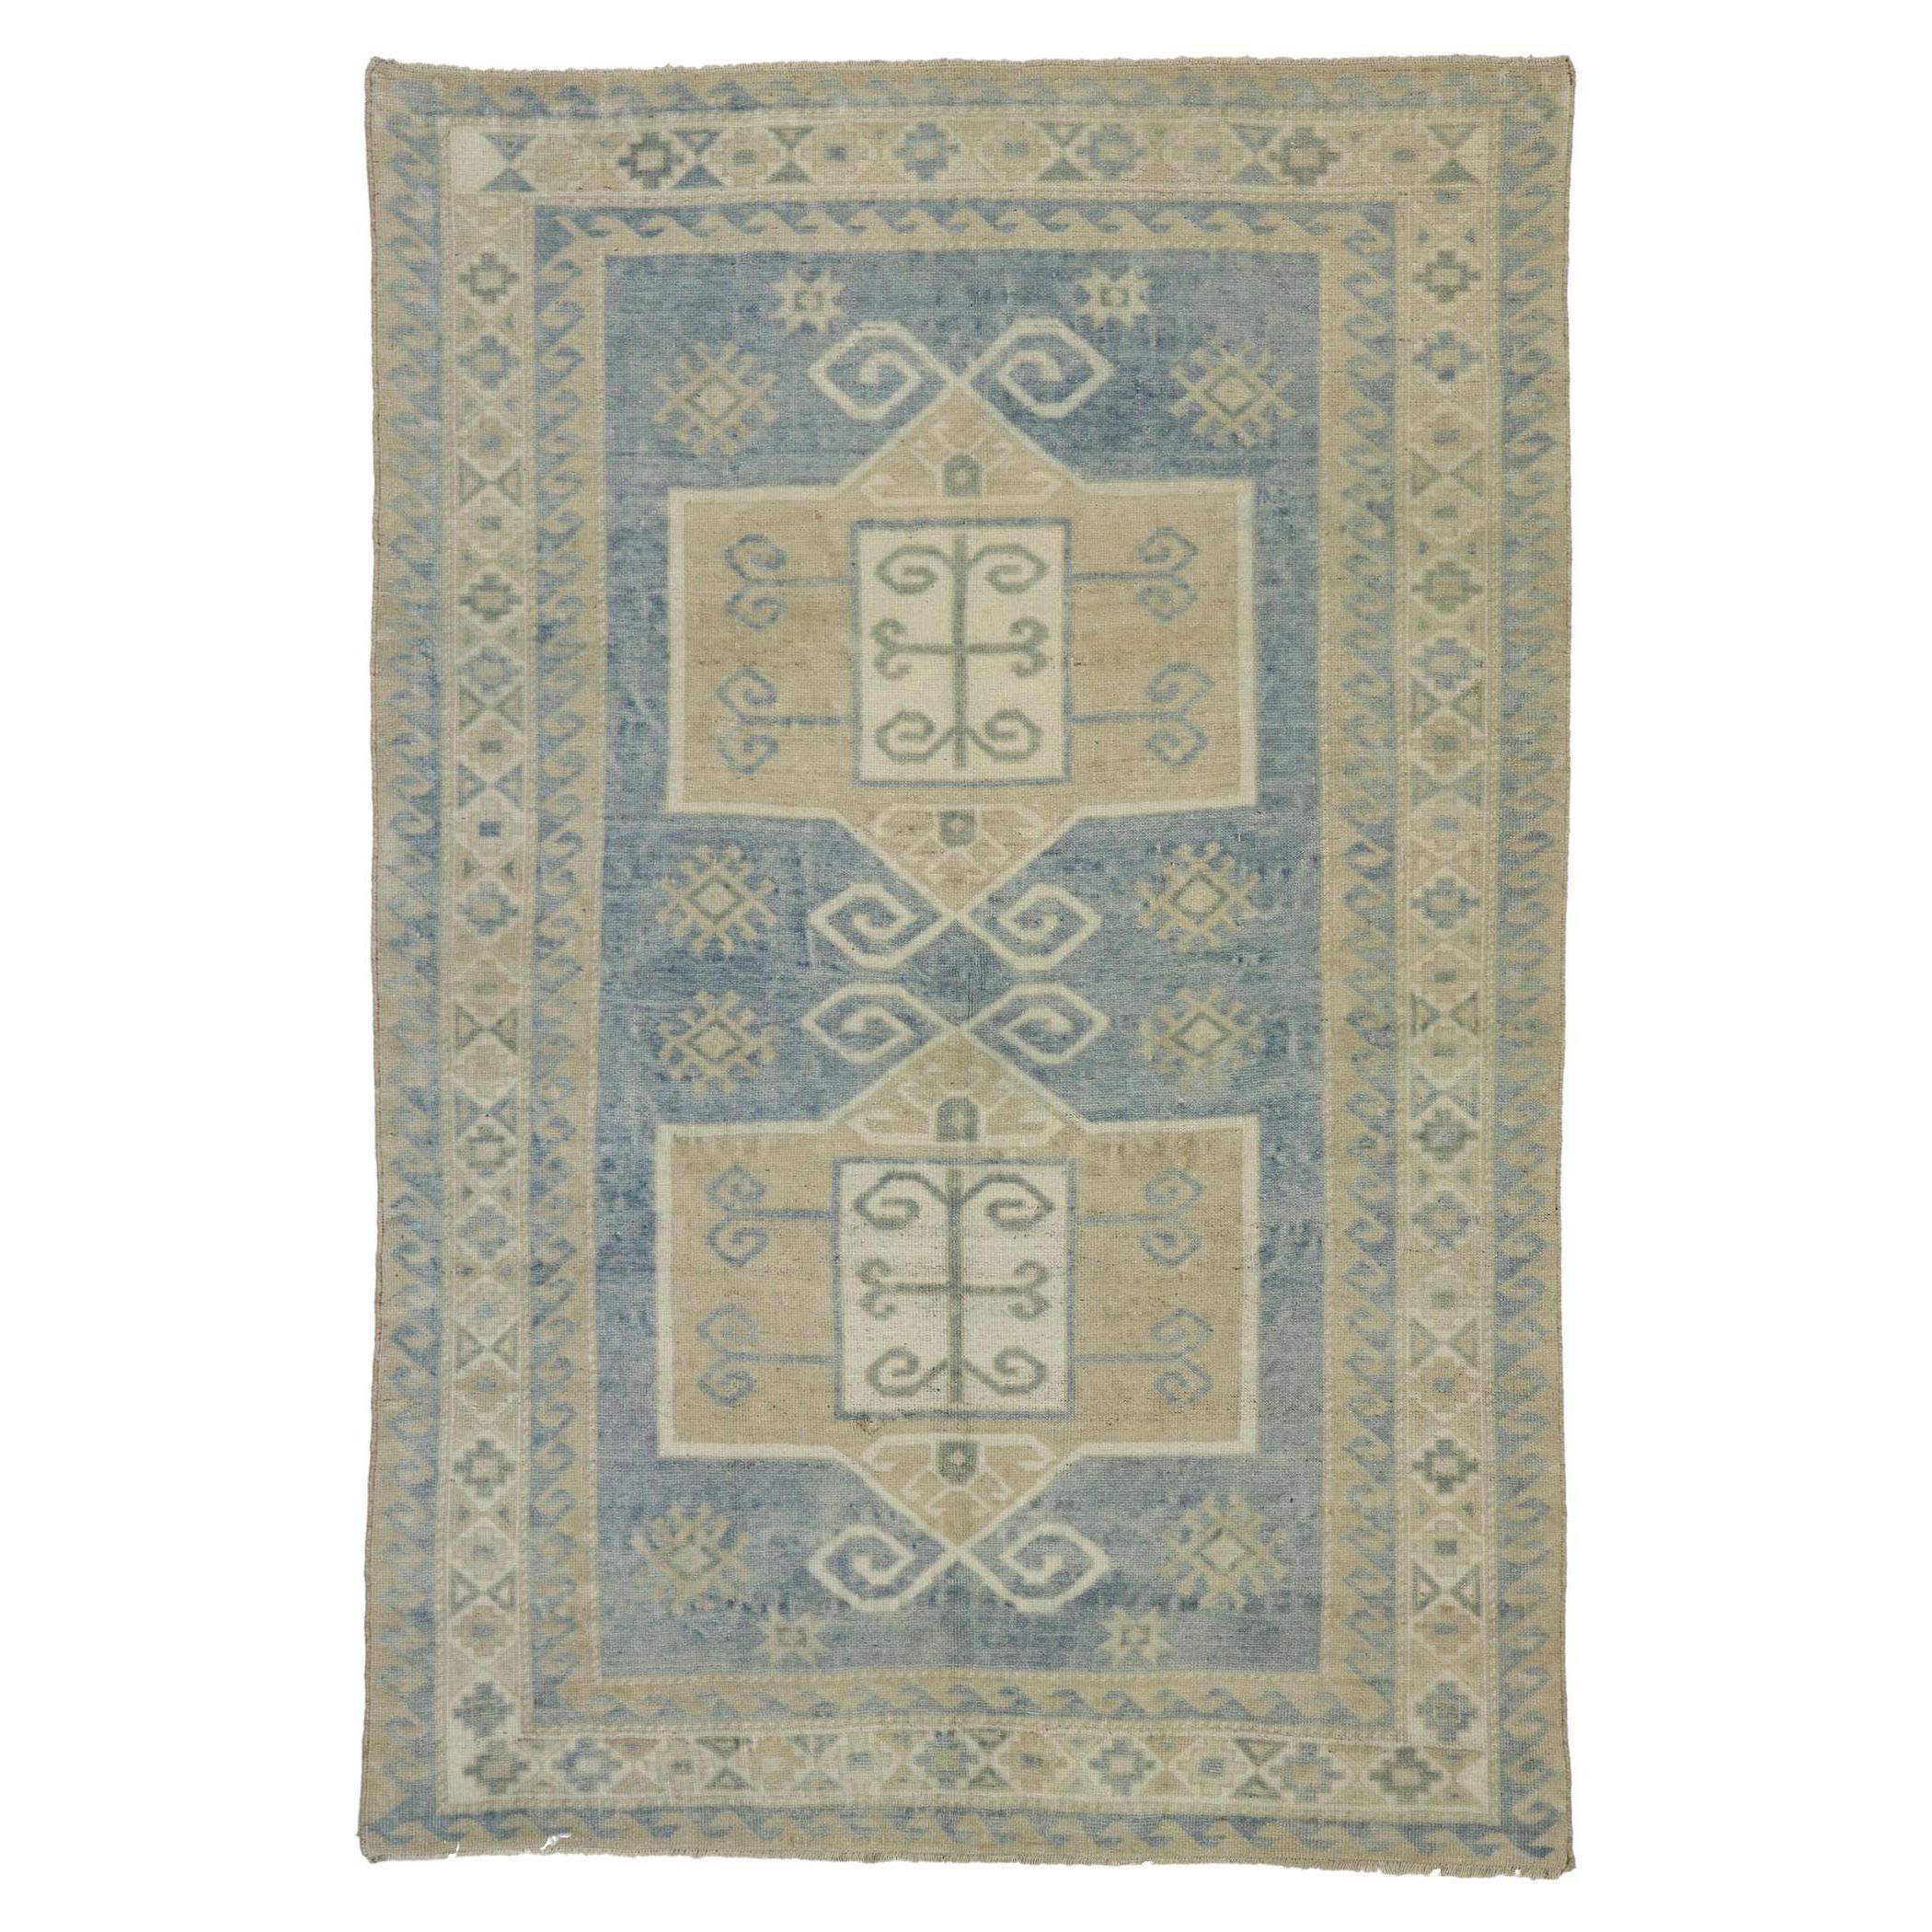 Vintage Turkish Oushak Rug with Relaxed Coastal Style For Sale